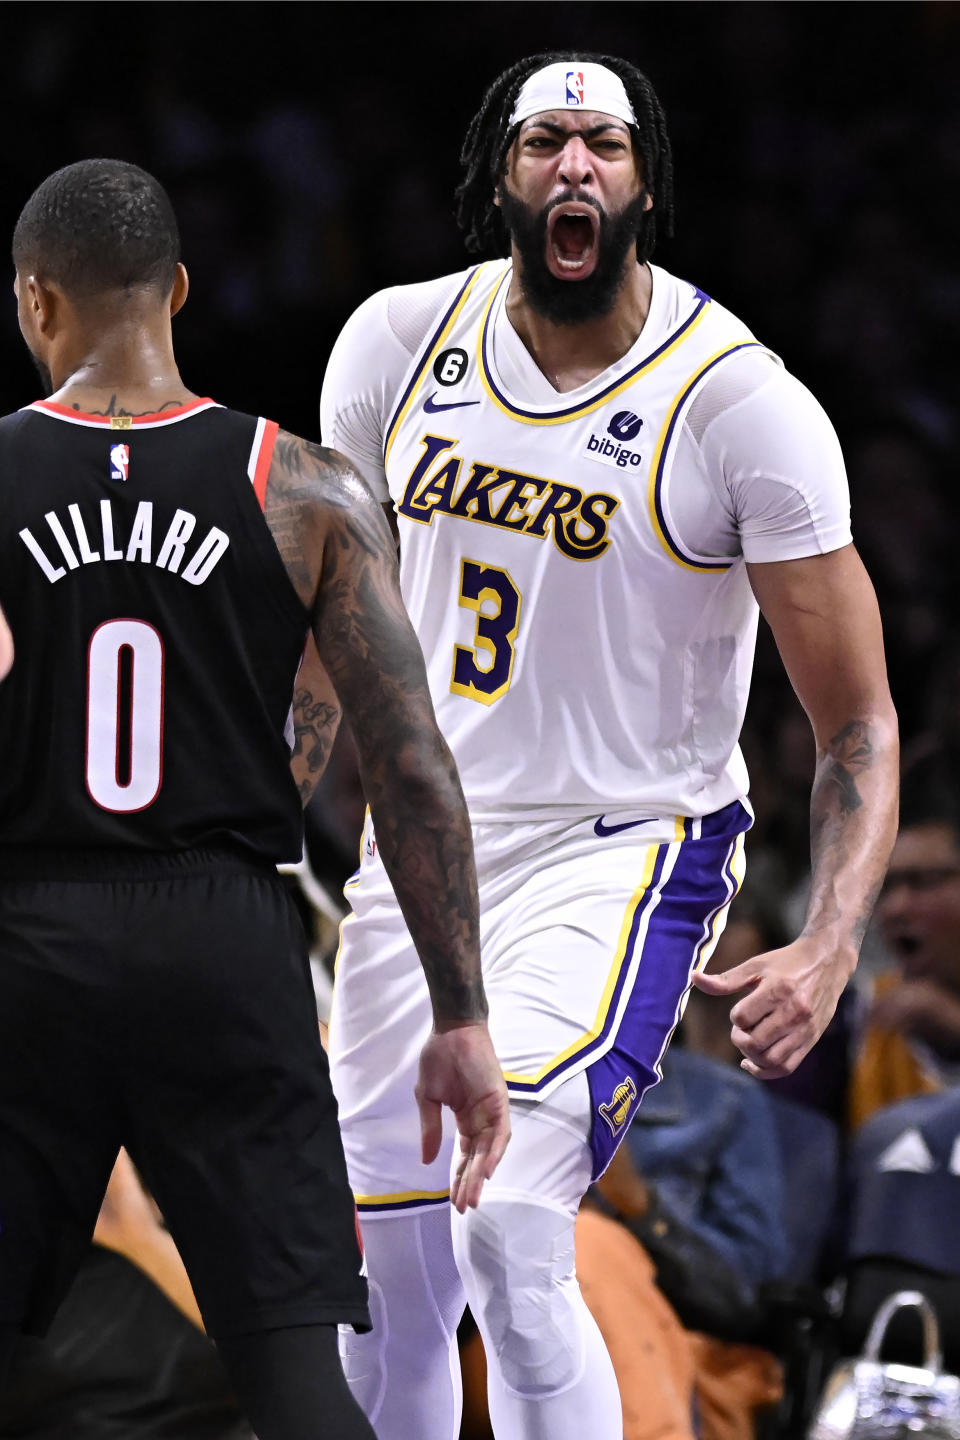 Los Angeles Lakers forward Anthony Davis, right, reacts after dunking against Portland Trail Blazers guard Damian Lillard (0) during the second half of an NBA basketball game Sunday, Oct. 23, 2022, in Los Angeles. (AP Photo/Alex Gallardo)